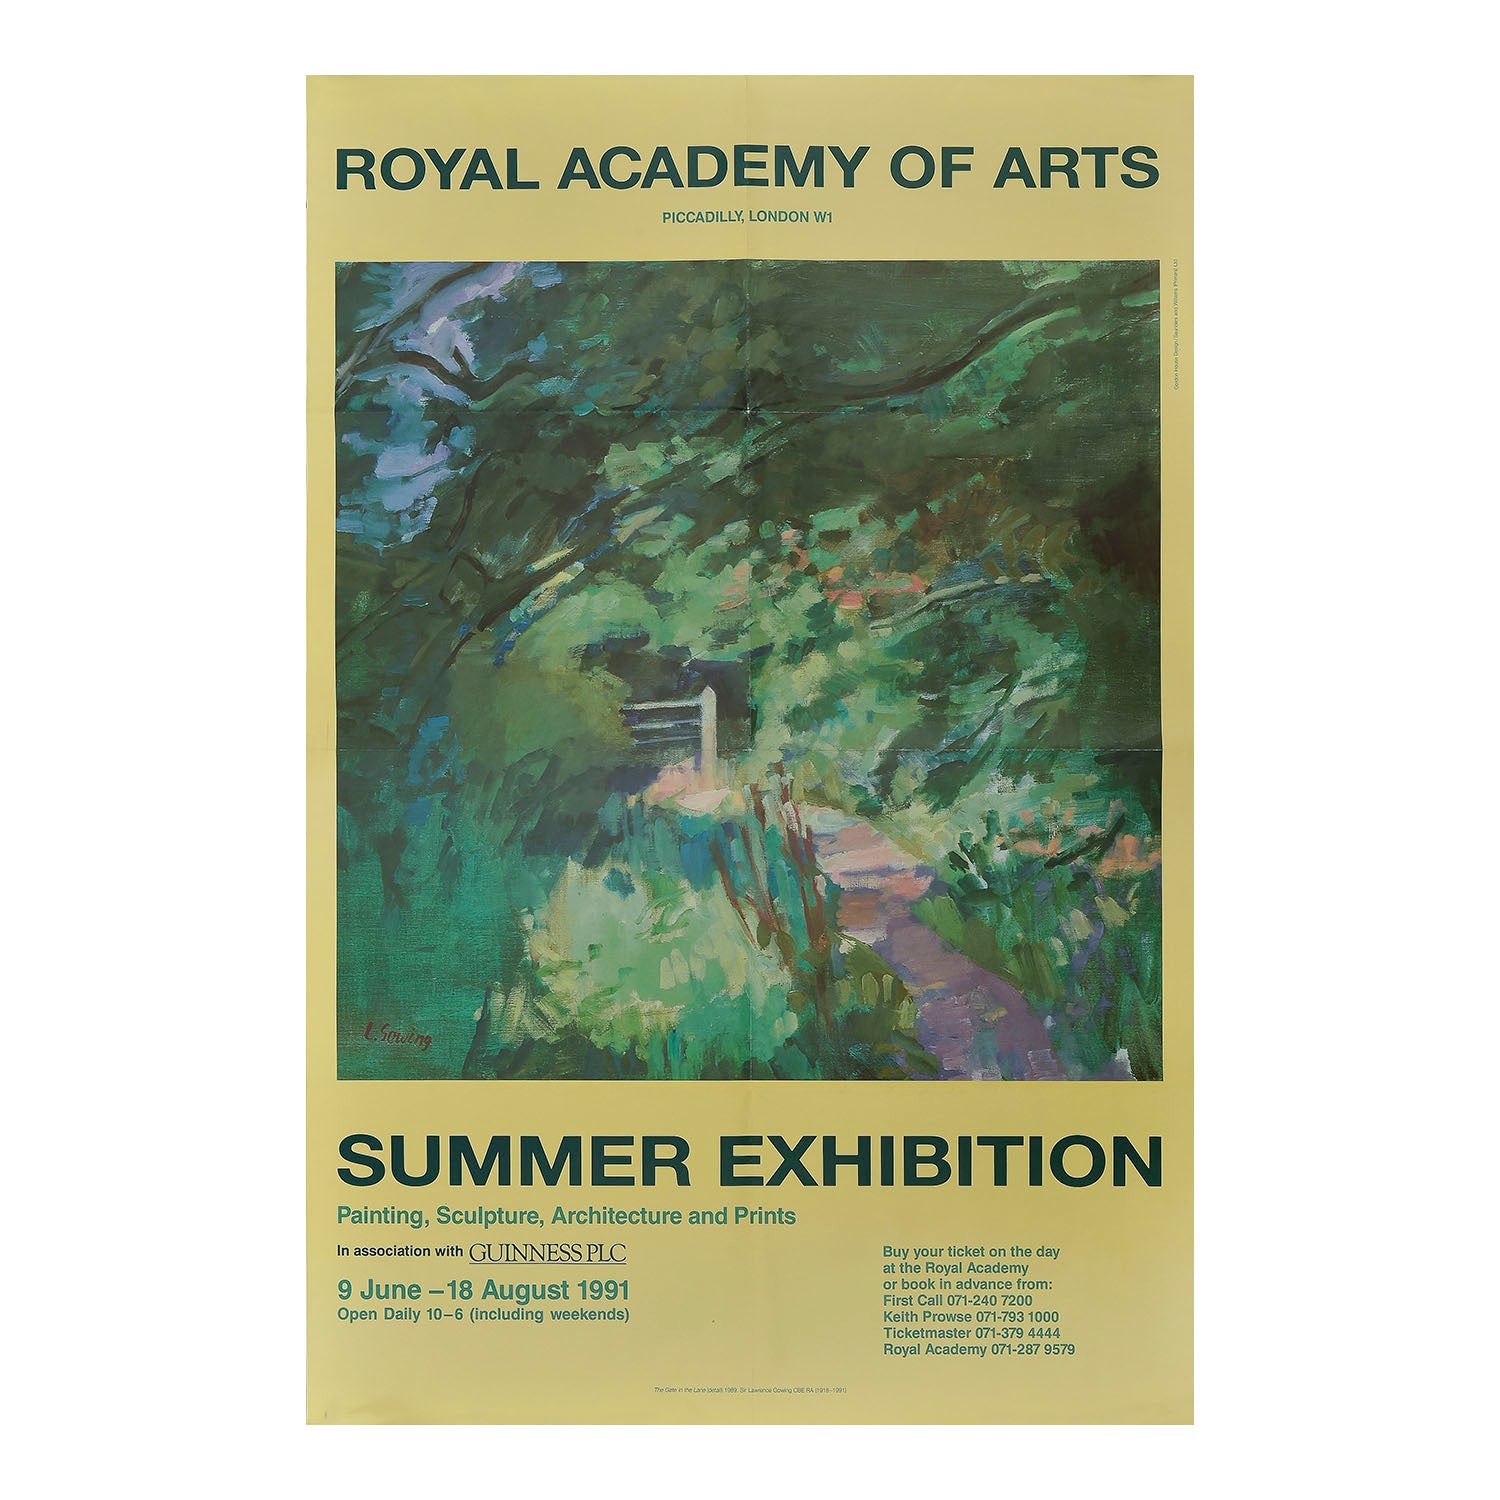 original poster, for the Royal Academy Summer Exhibition in 1991 featuring a detail from The Gate in the Lane (1989) by Lawrence Gowing RA, with layout design by Gordon House. 